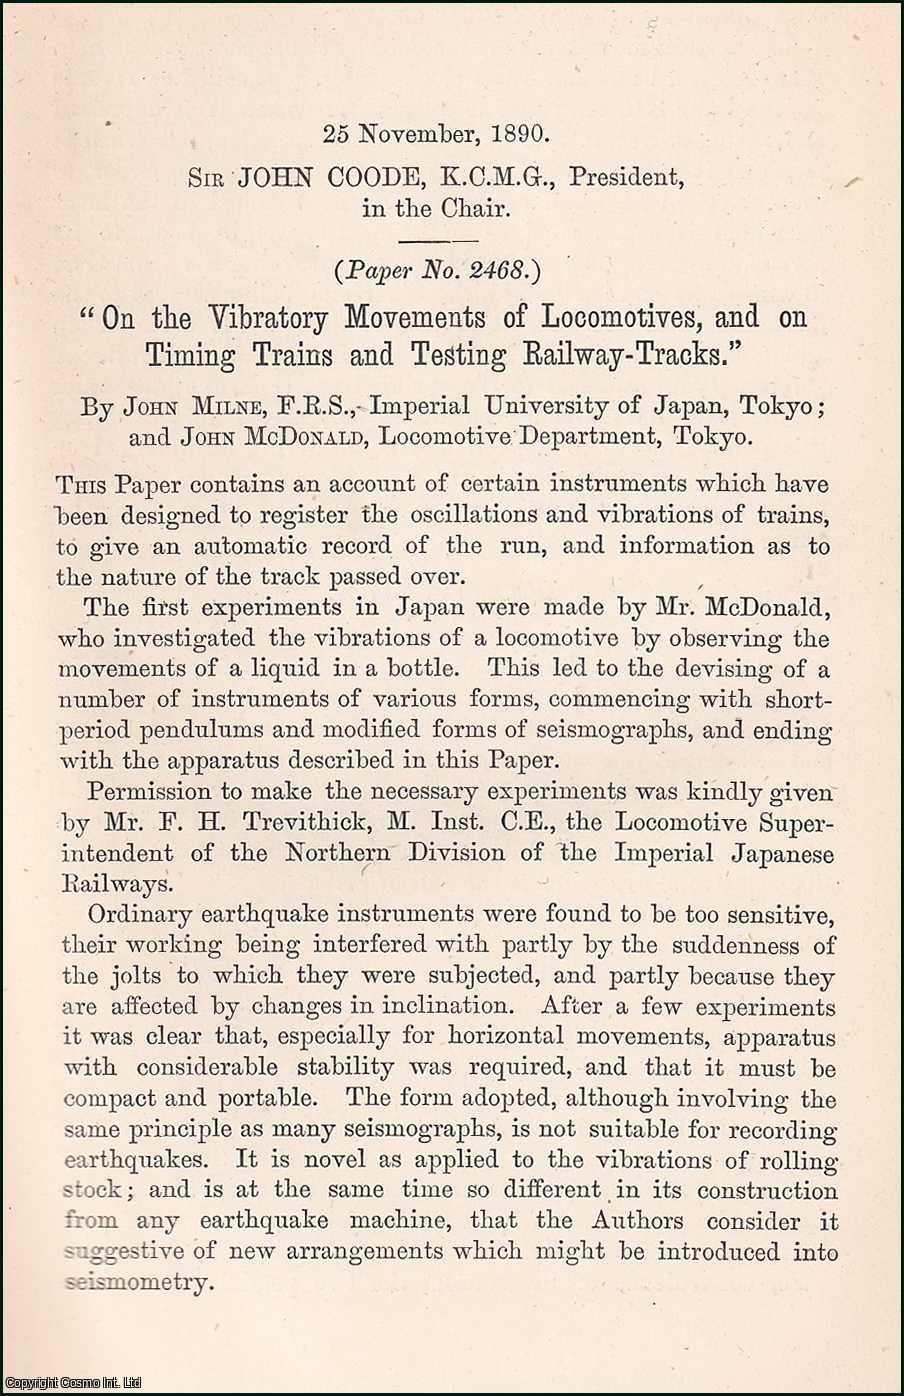 John Milne, F.R.S., Imperial University of Japan, Tokyo ; & John McDonald, Locomotive Department, Tokyo. - The Vibratory Movements of Locomotives, & on Timing Trains & Testing Railway-Tracks. An uncommon original article from the Institution of Civil Engineers reports, 1890.